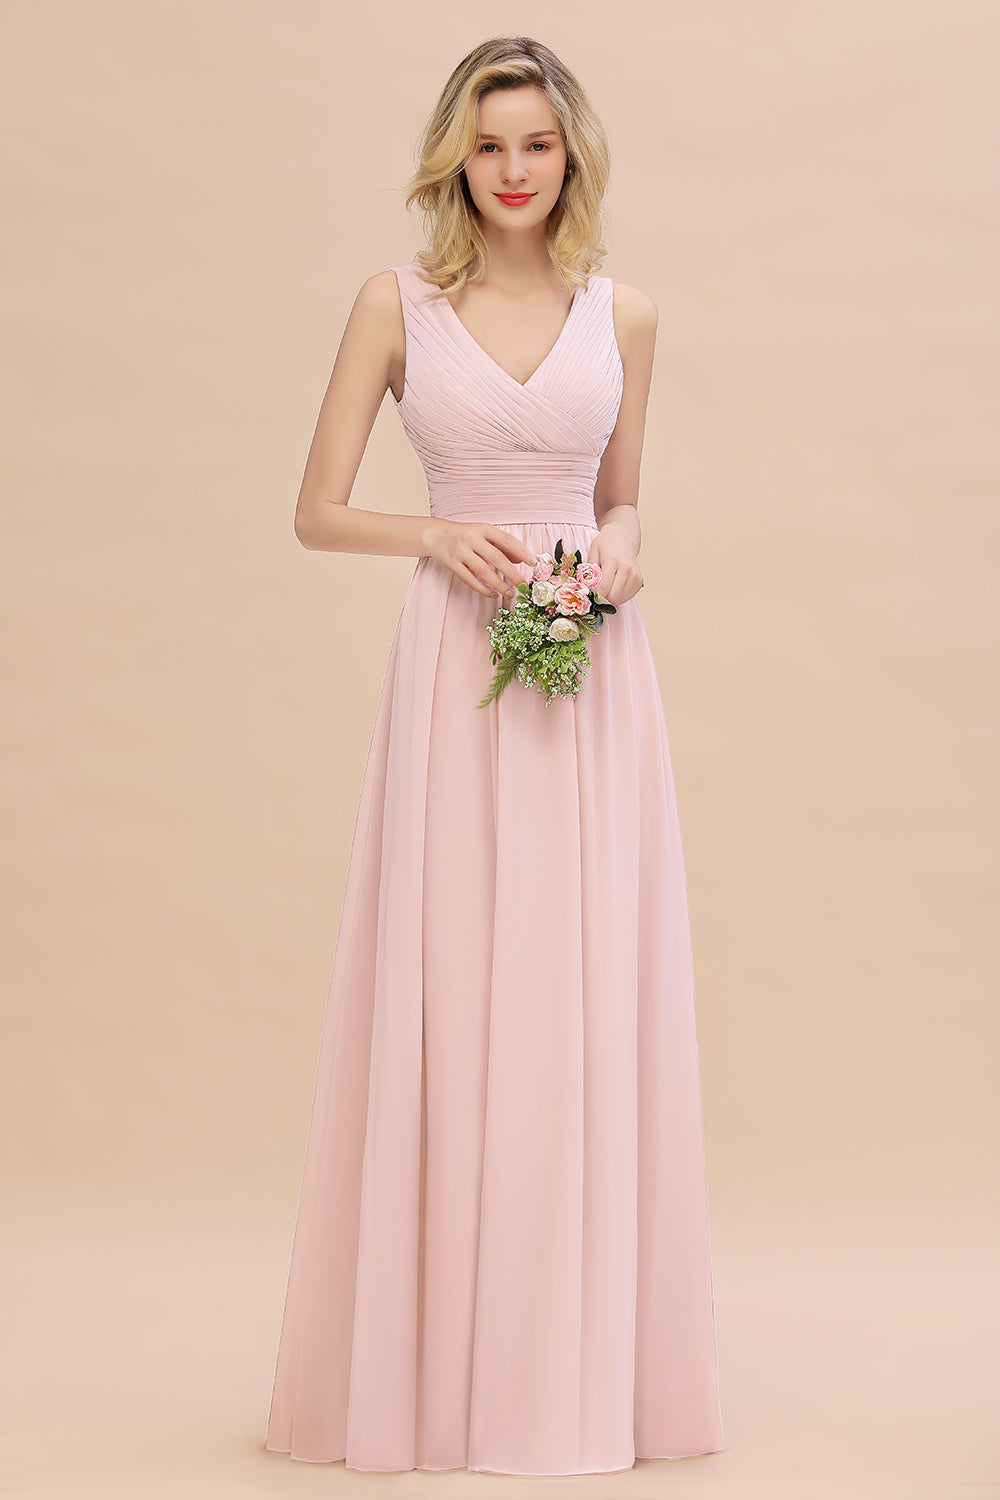 Load image into Gallery viewer, Elegant A-line V-Neck Long Bridesmaid Dress with Ruffles-BIZTUNNEL
